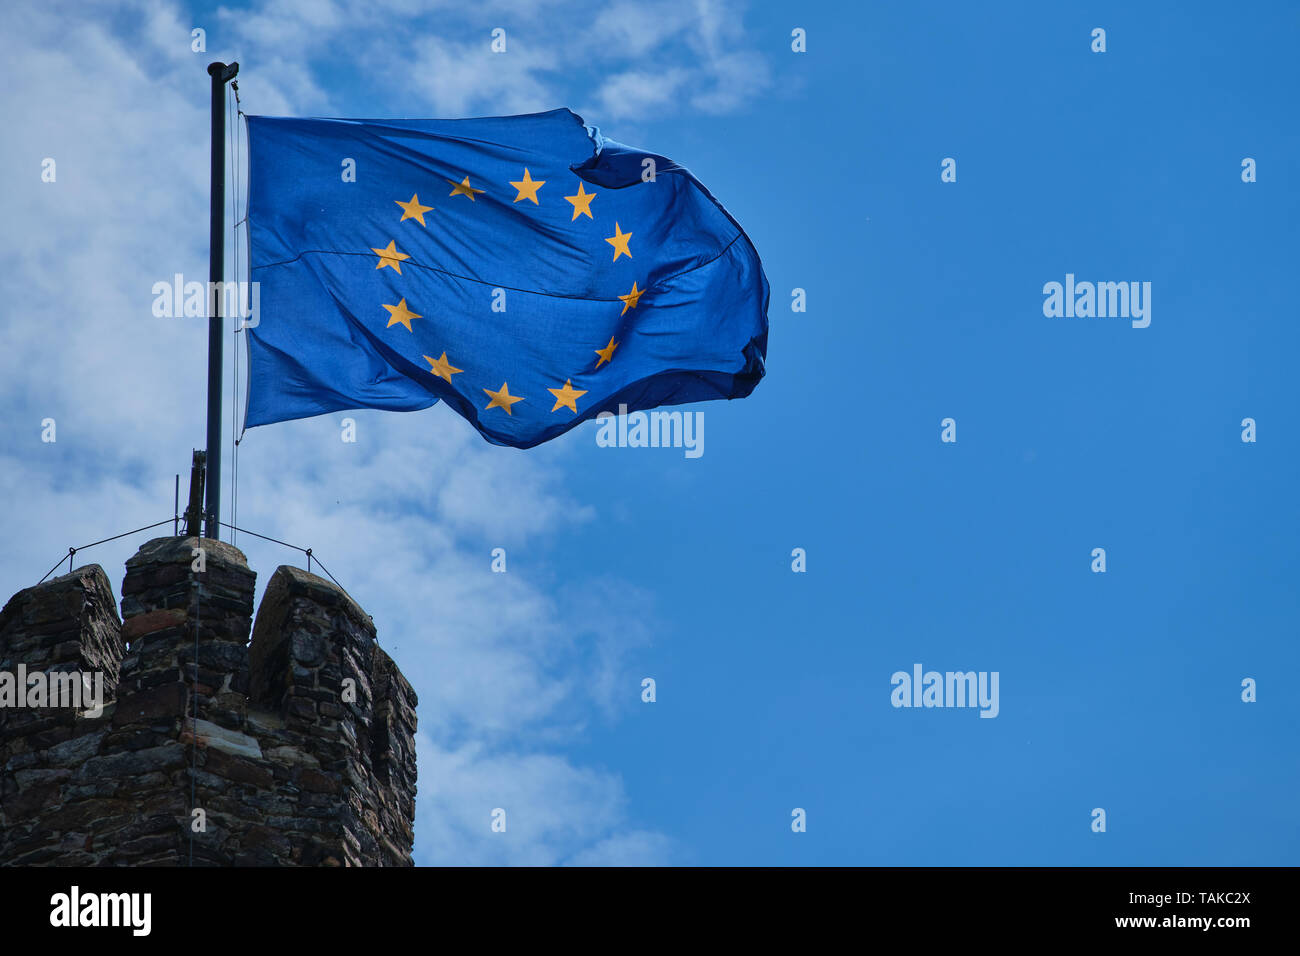 photography of a waving flag of Europe on a tower against blue sky with clouds Stock Photo